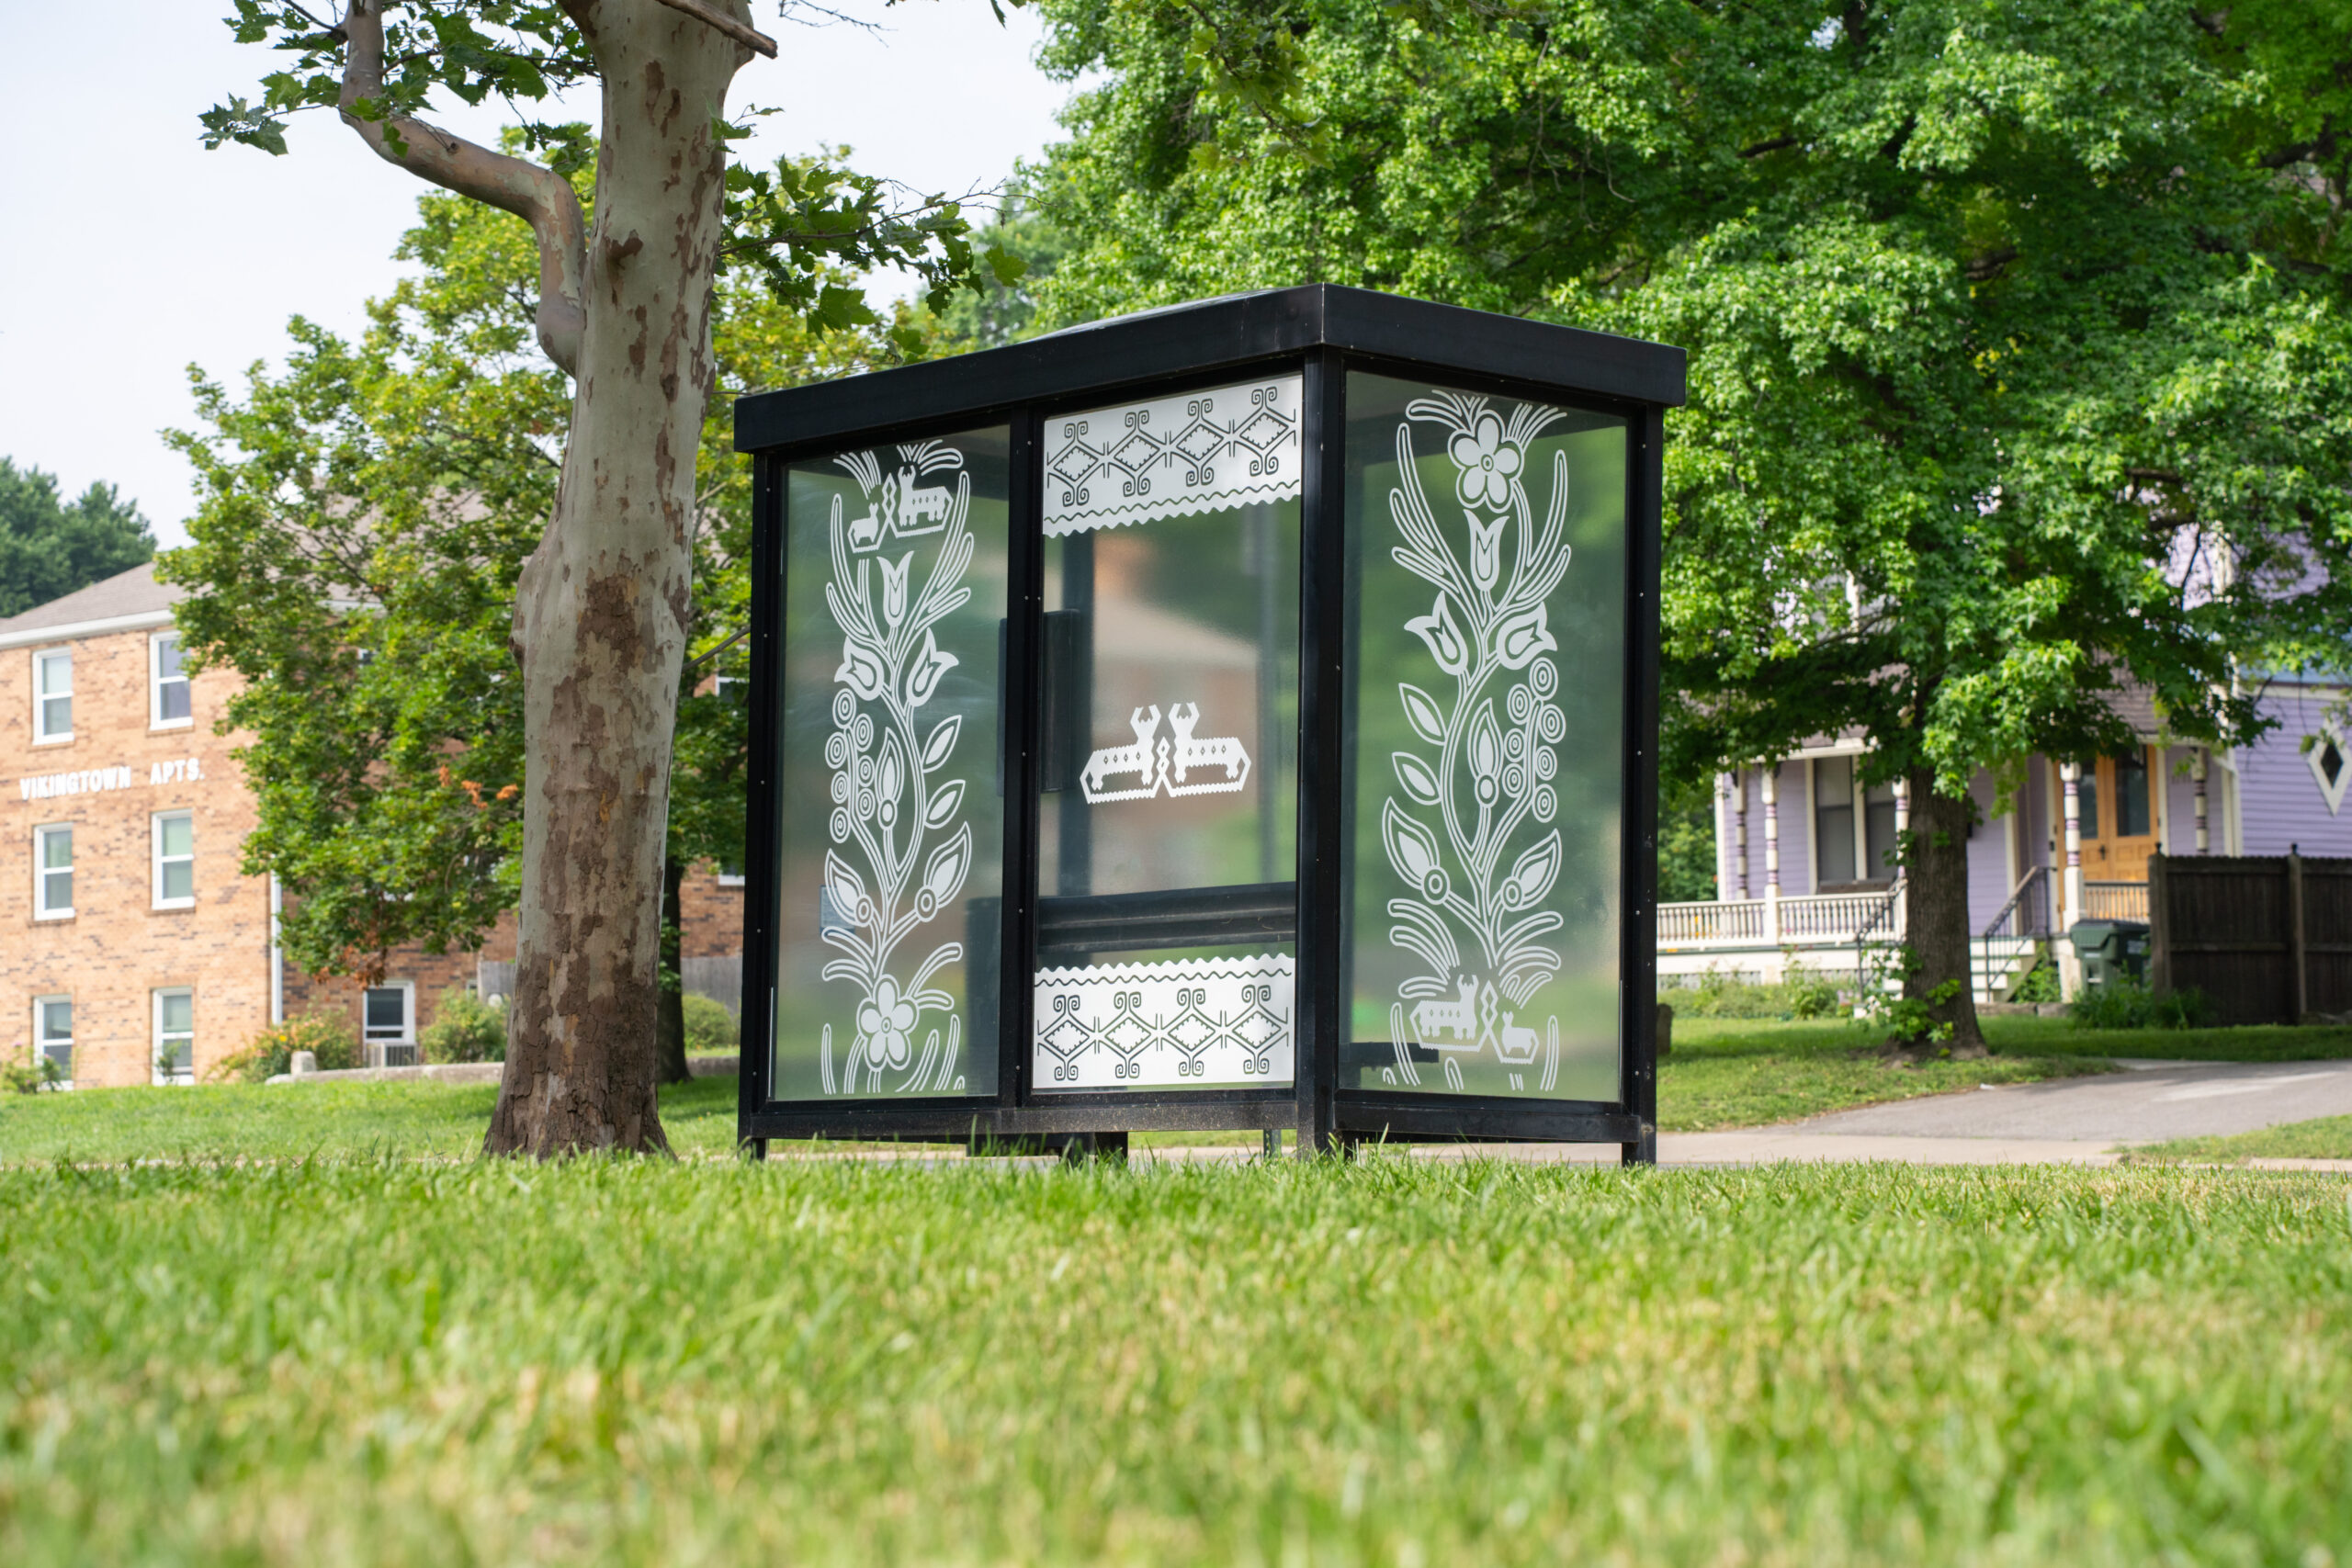 Featured image for “Ribbon cutting to celebrate bus shelter art”